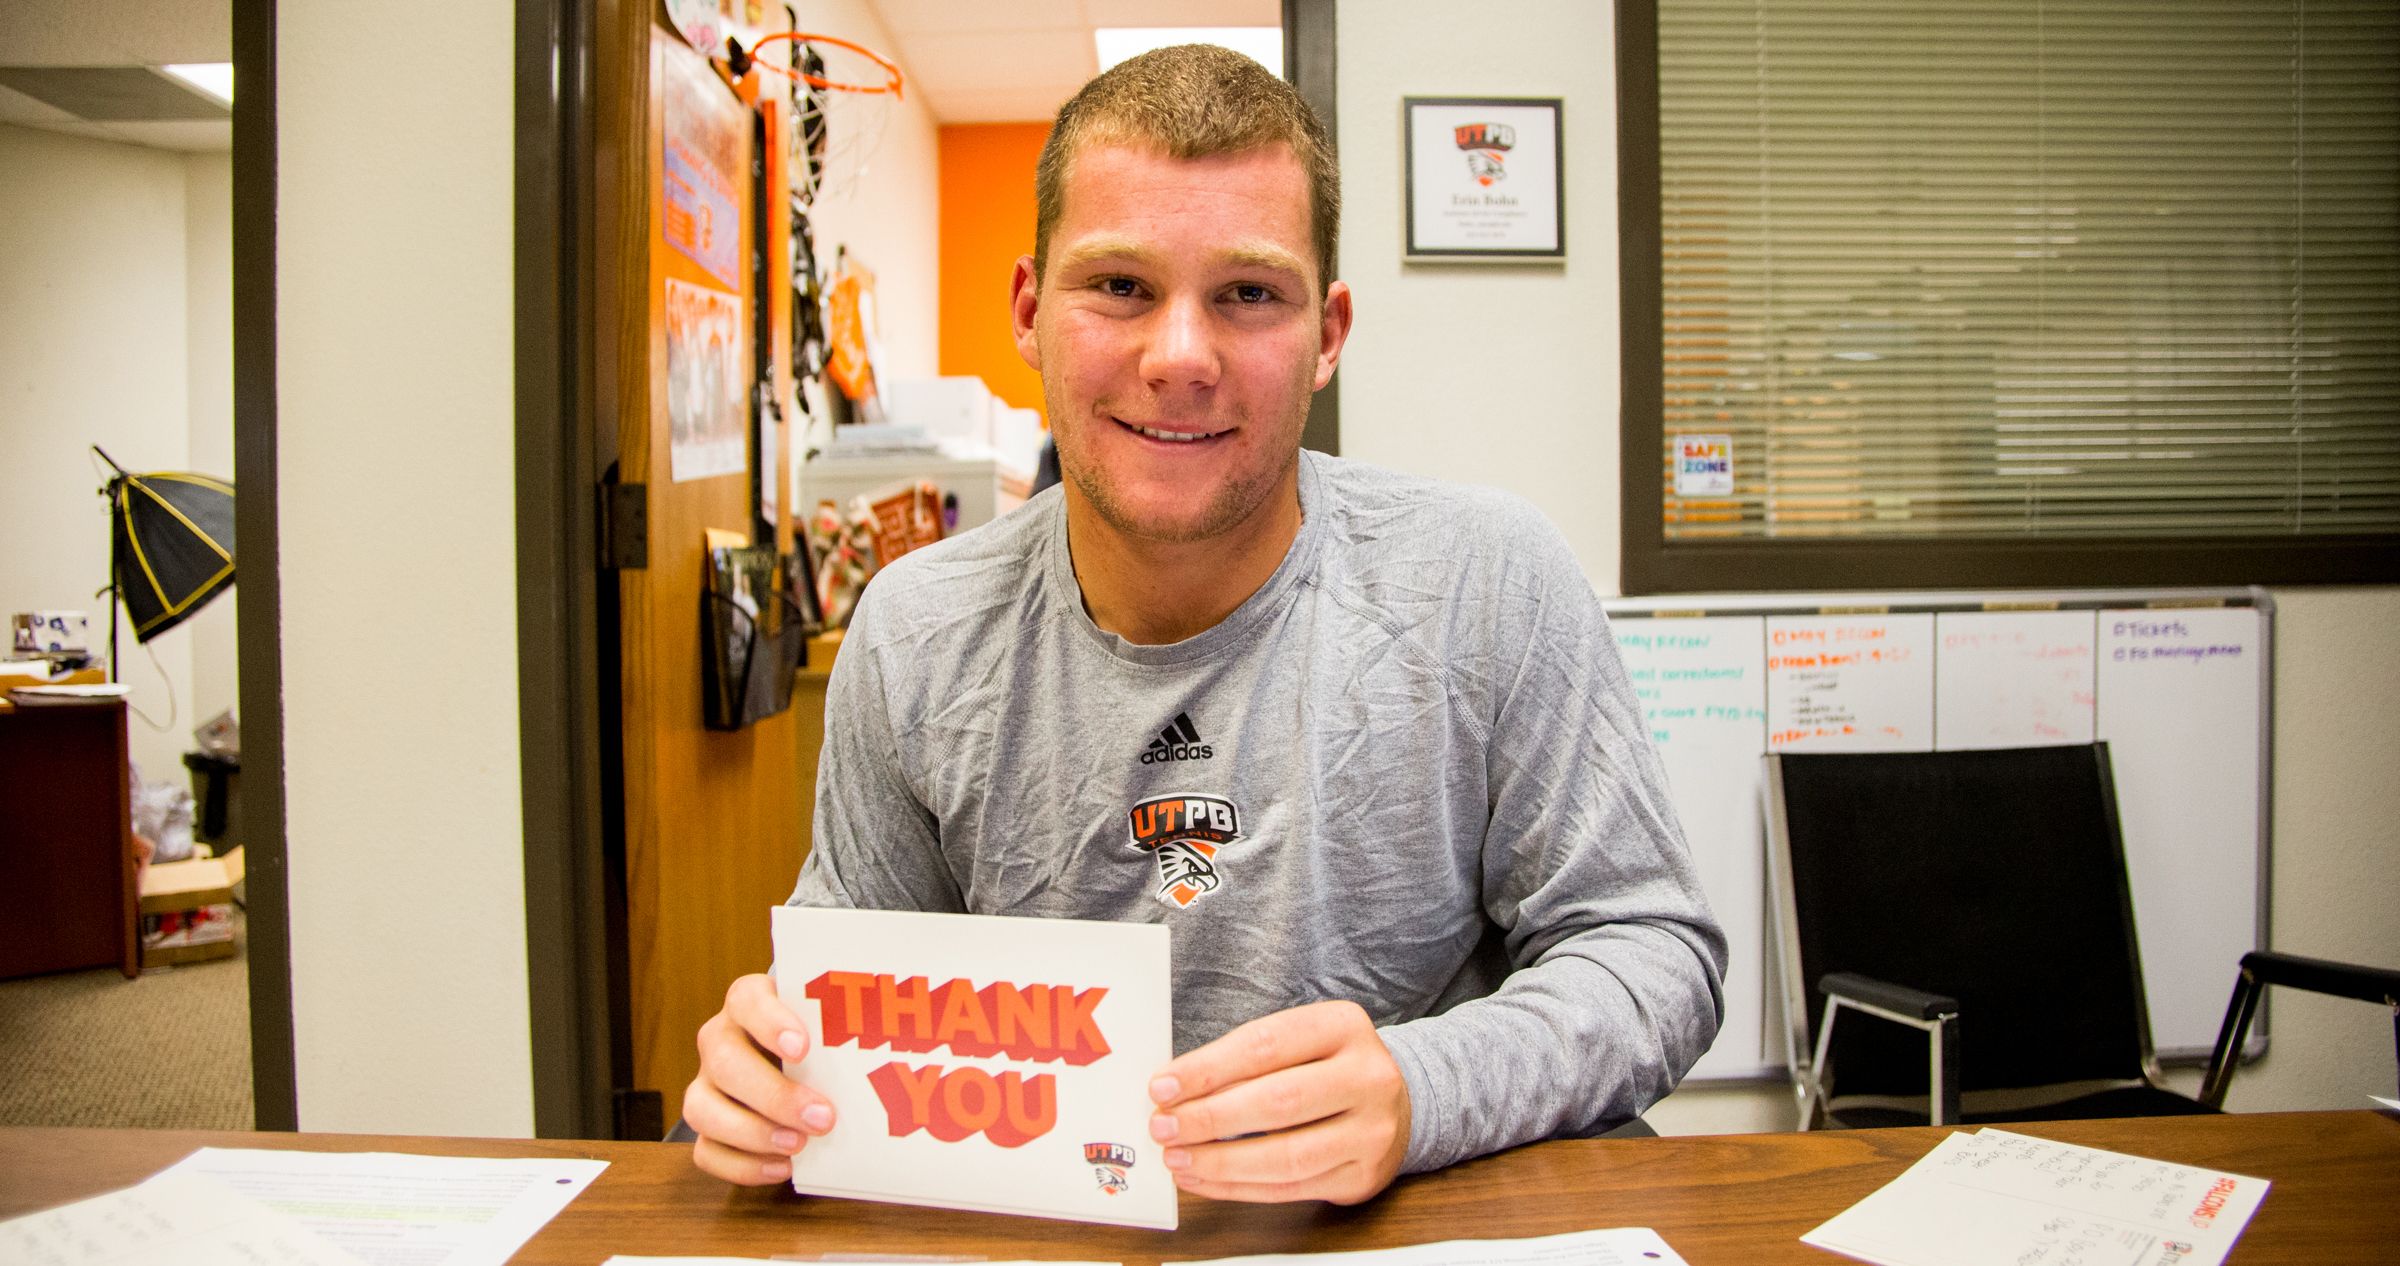 Student-athlete smiling holding thank you card